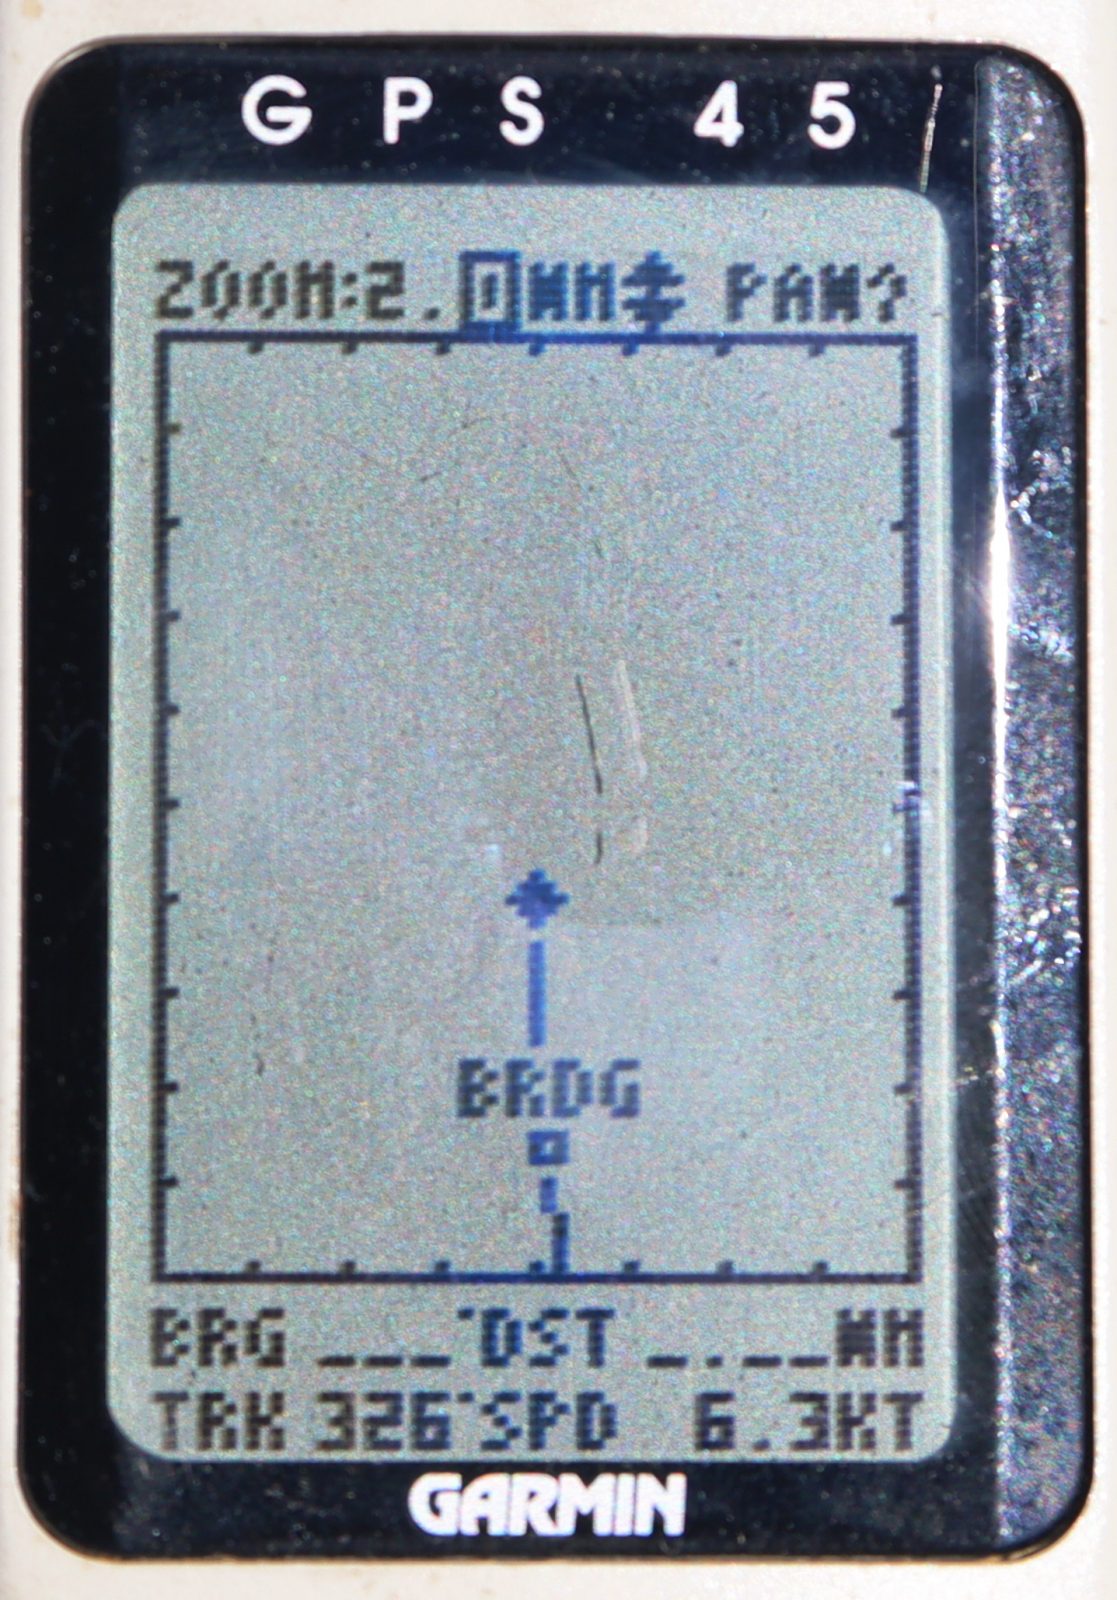 My Garmin GPS 45 was amazing in 1994, and it still works (mostly) - Panbo